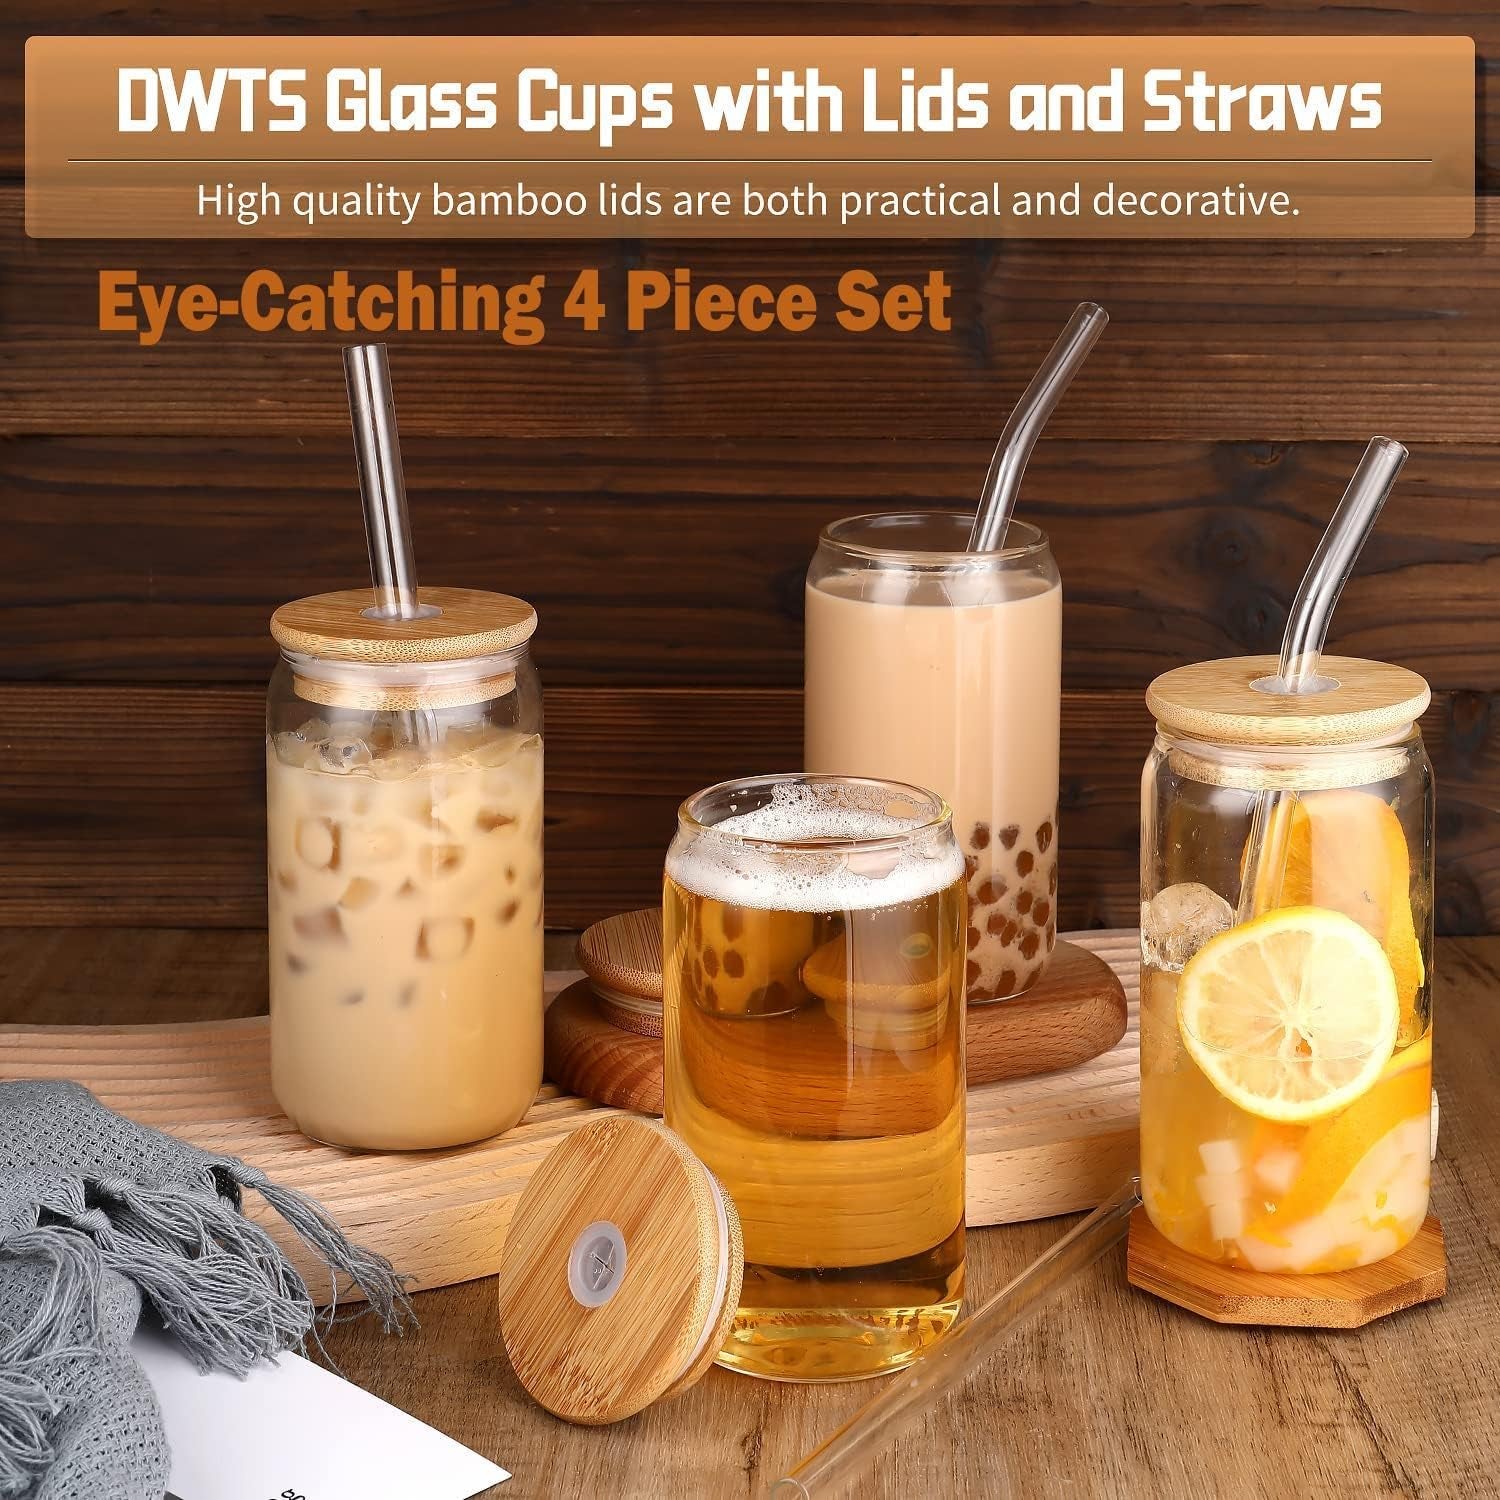 Dealusy 4 Set Glass Cups with Lids and Straws 16 oz, Glasses